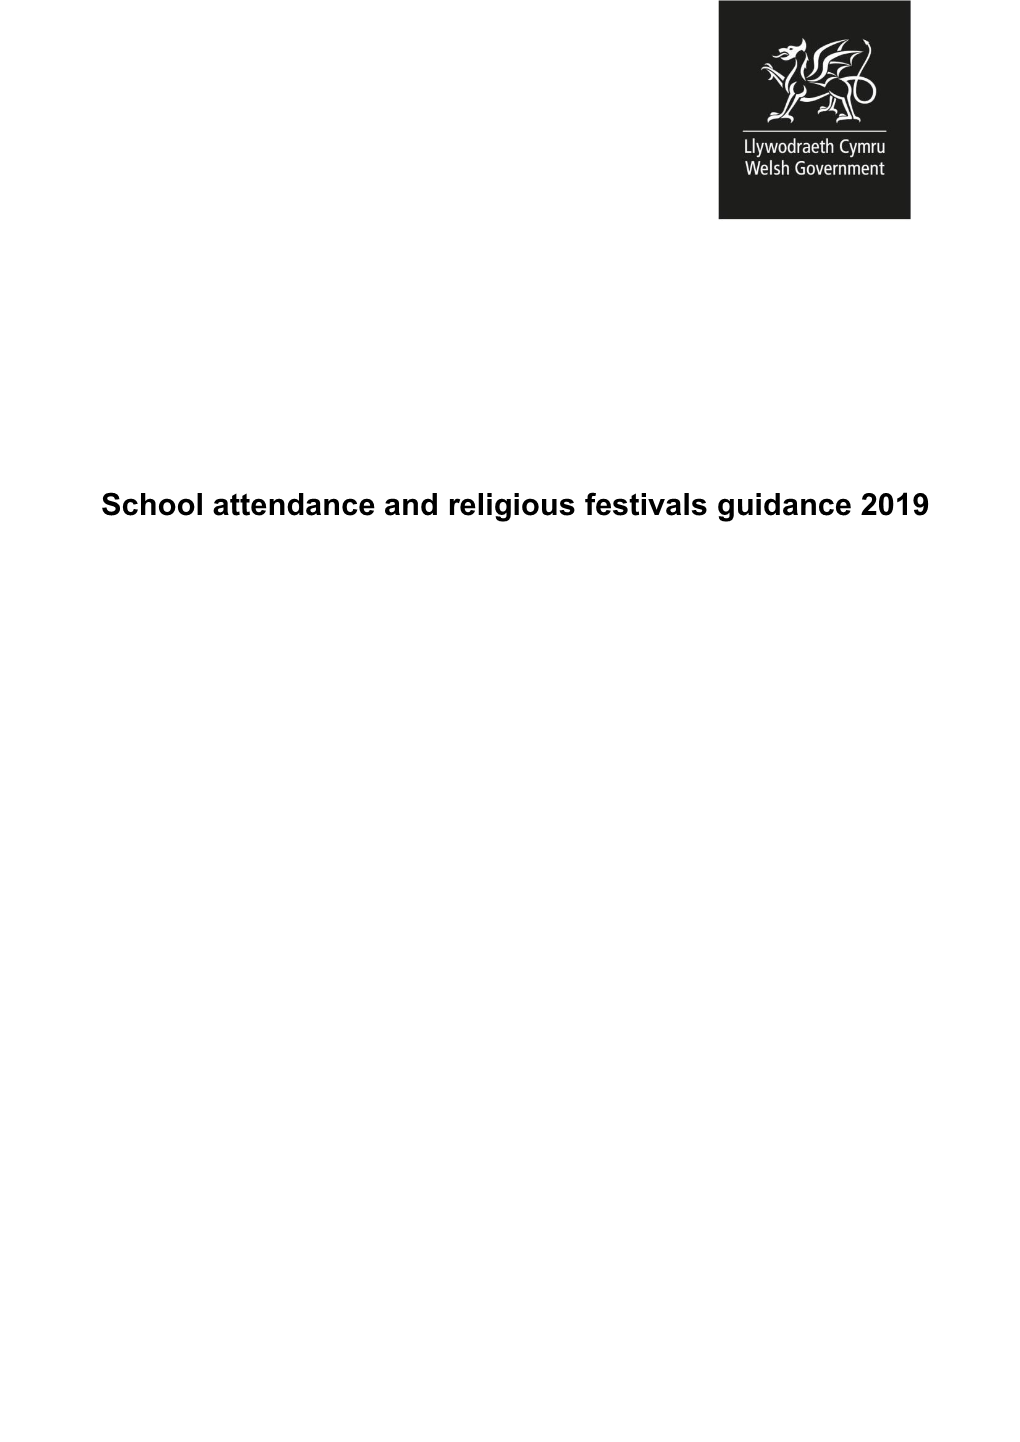 School Attendance and Religious Festivals Guidance 2019